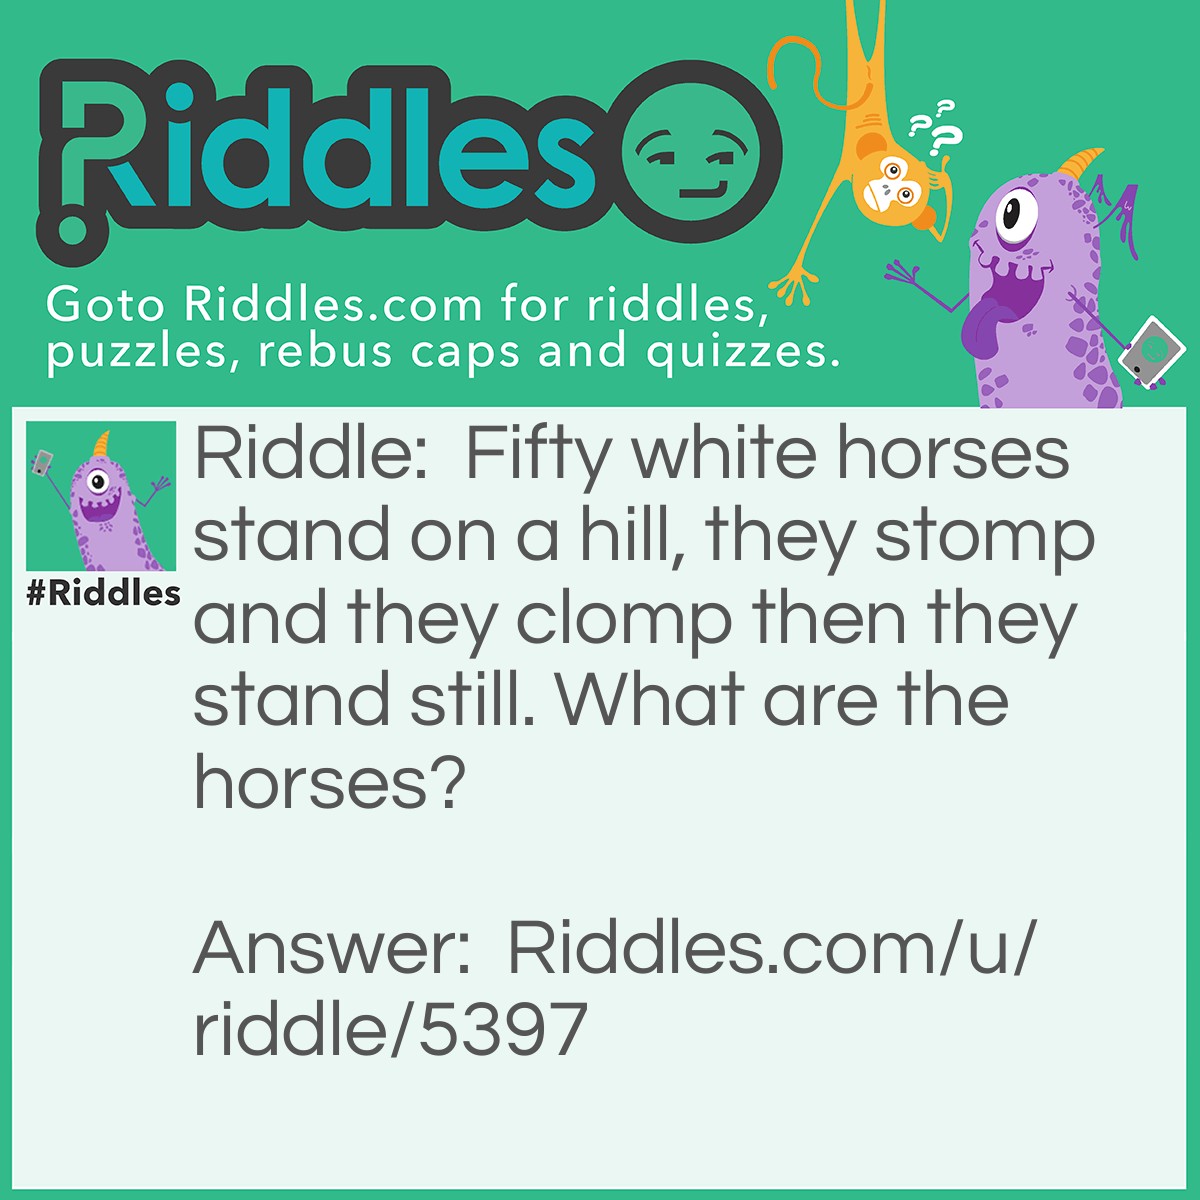 Riddle: Fifty white horses stand on a hill, they stomp and they clomp then they stand still. What are the horses? Answer: Teeth.